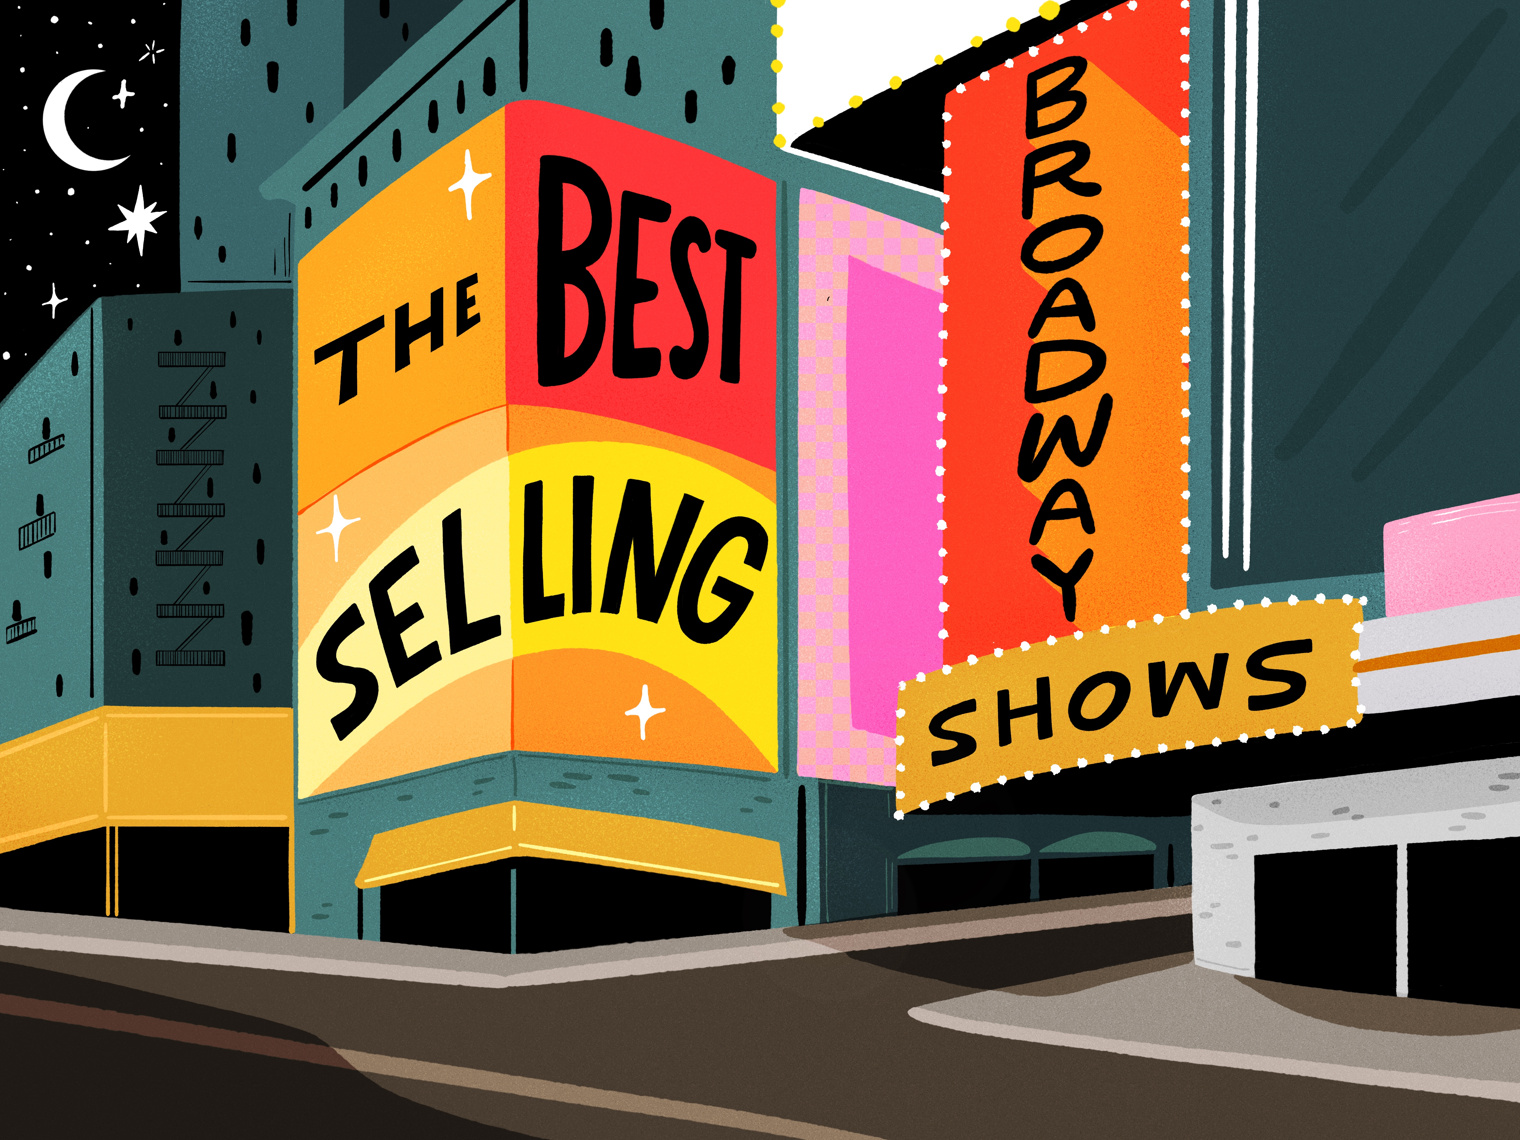 Lead image for the article Best Selling Broadway Shows